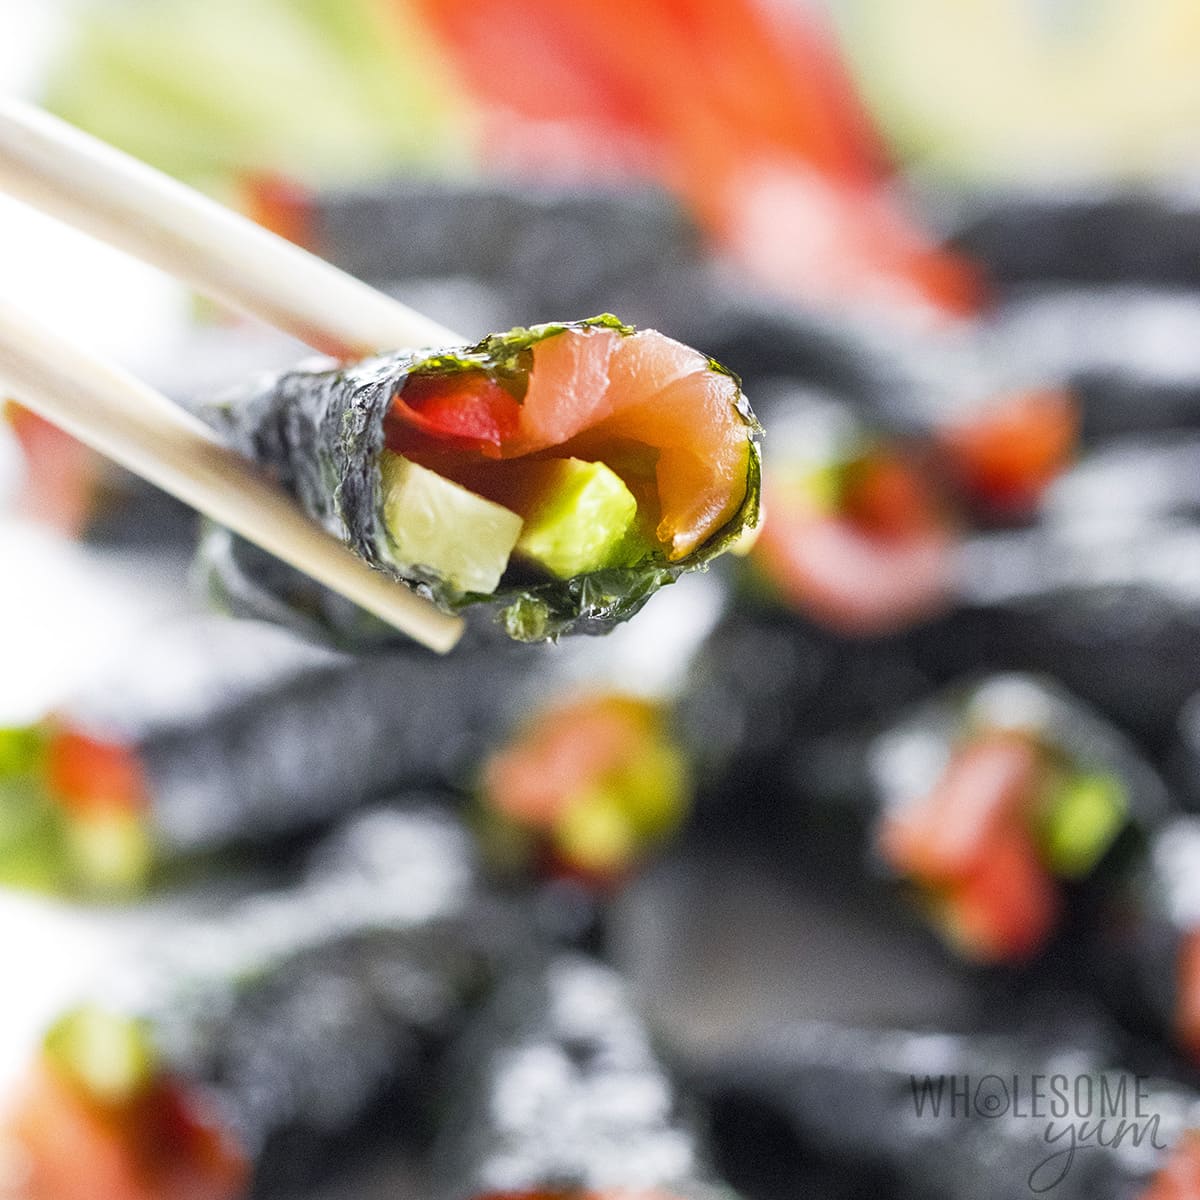 https://www.wholesomeyum.com/wp-content/uploads/2021/10/wholesomeyum-Keto-Sushi-Rolls-Without-Rice-Carbs-In-Sushi-13.jpg